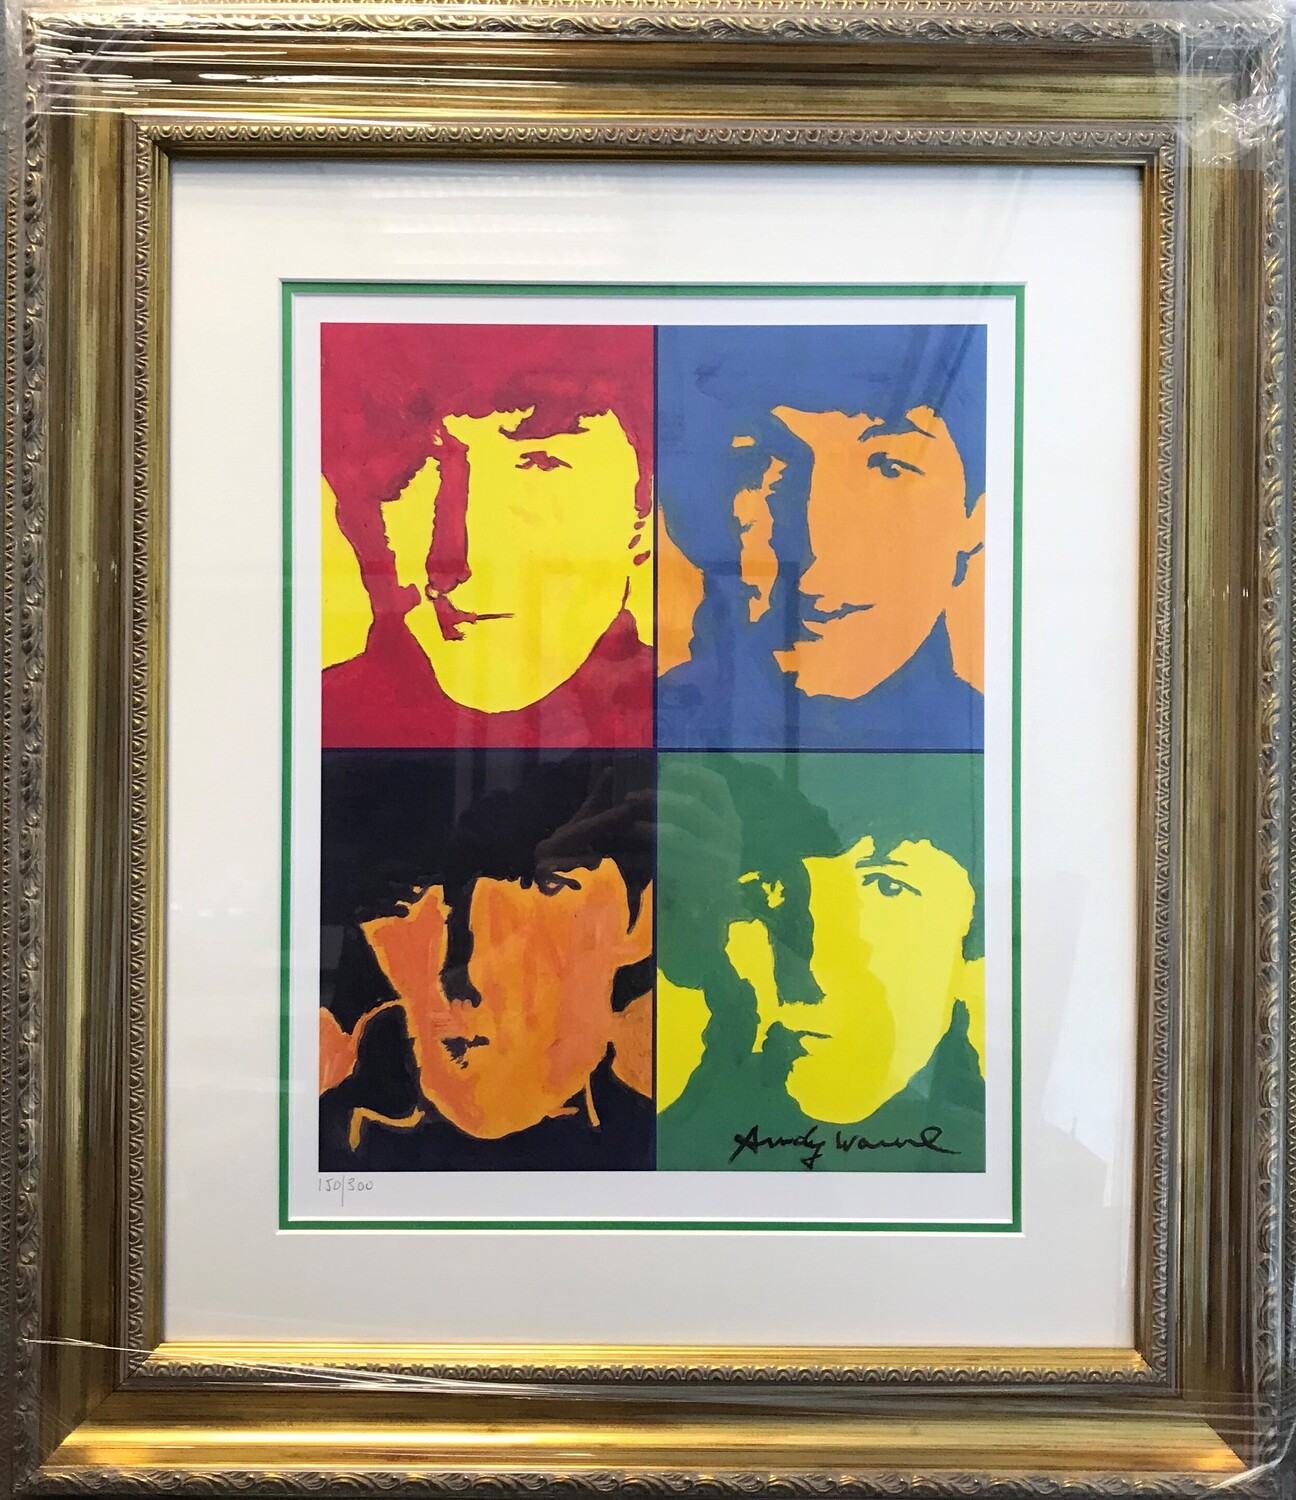 The Beatles by Andy Warhol